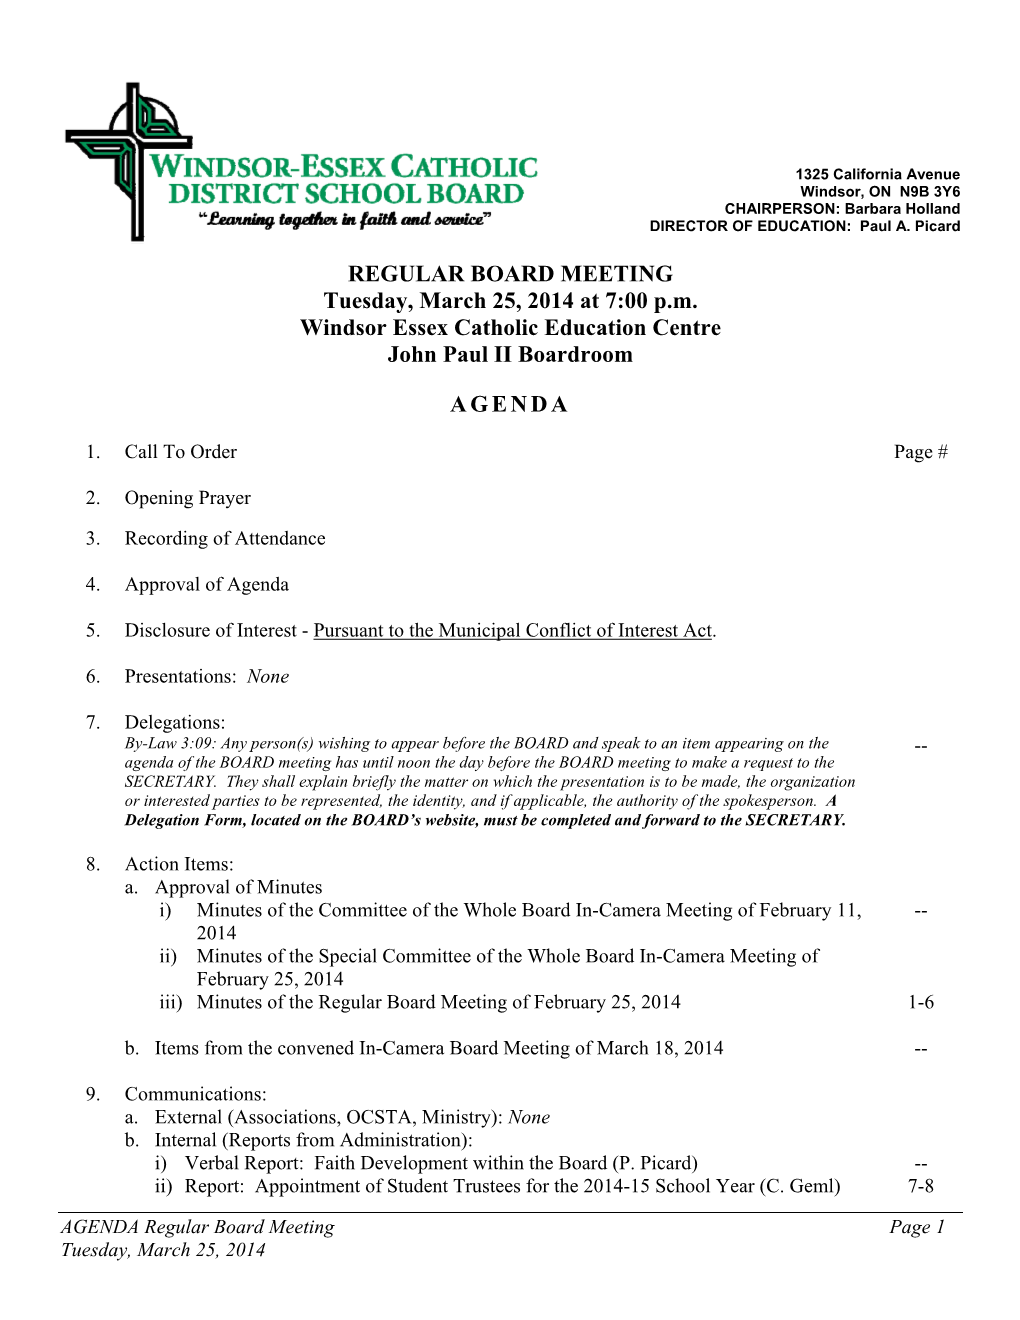 REGULAR BOARD MEETING Tuesday, March 25, 2014 at 7:00 P.M